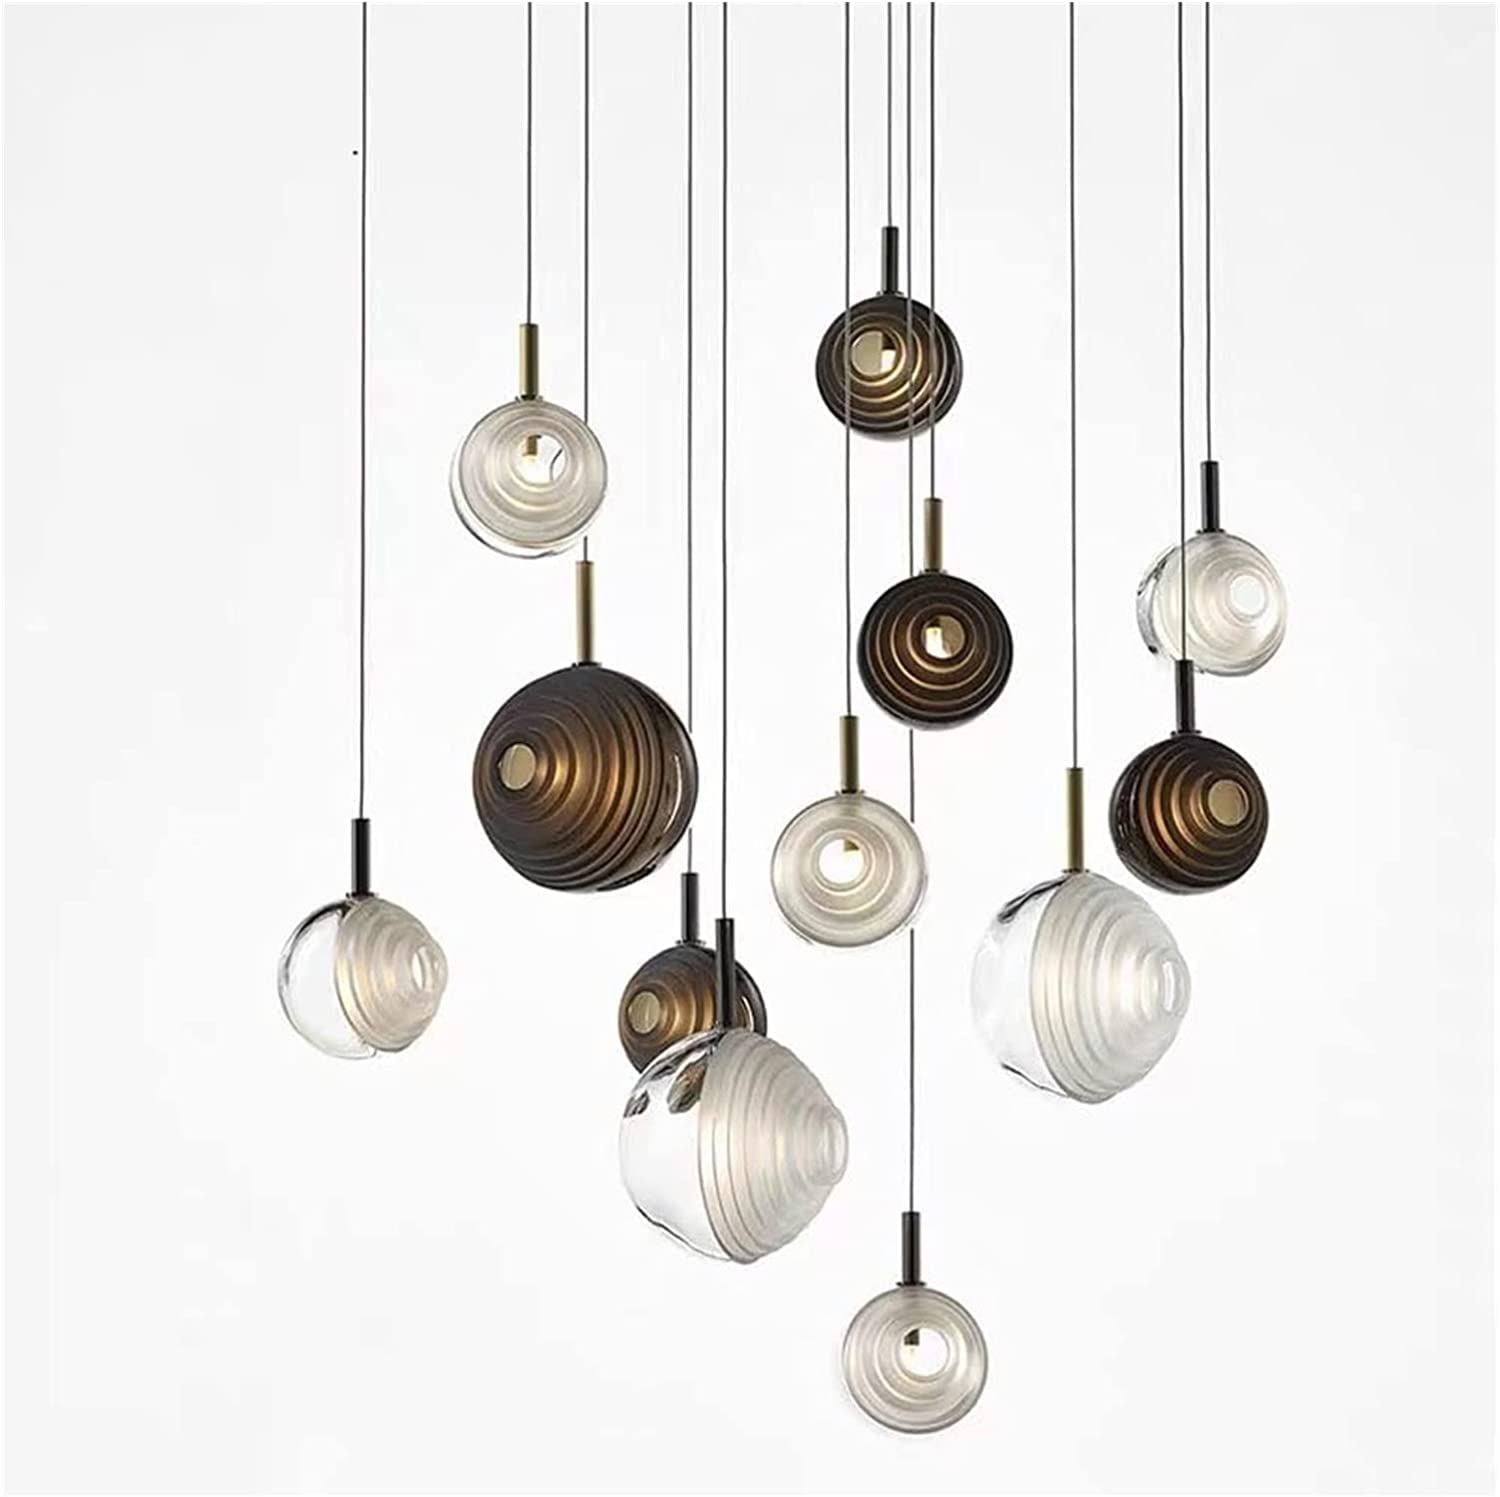 MD-3302/200 Unique Design Metel Glass ceiling pendant light creative Smokey Grey and Brown glass ball hanging Pendant Light for studio,  bedside, bar, Coffee Shop (Single Piece)